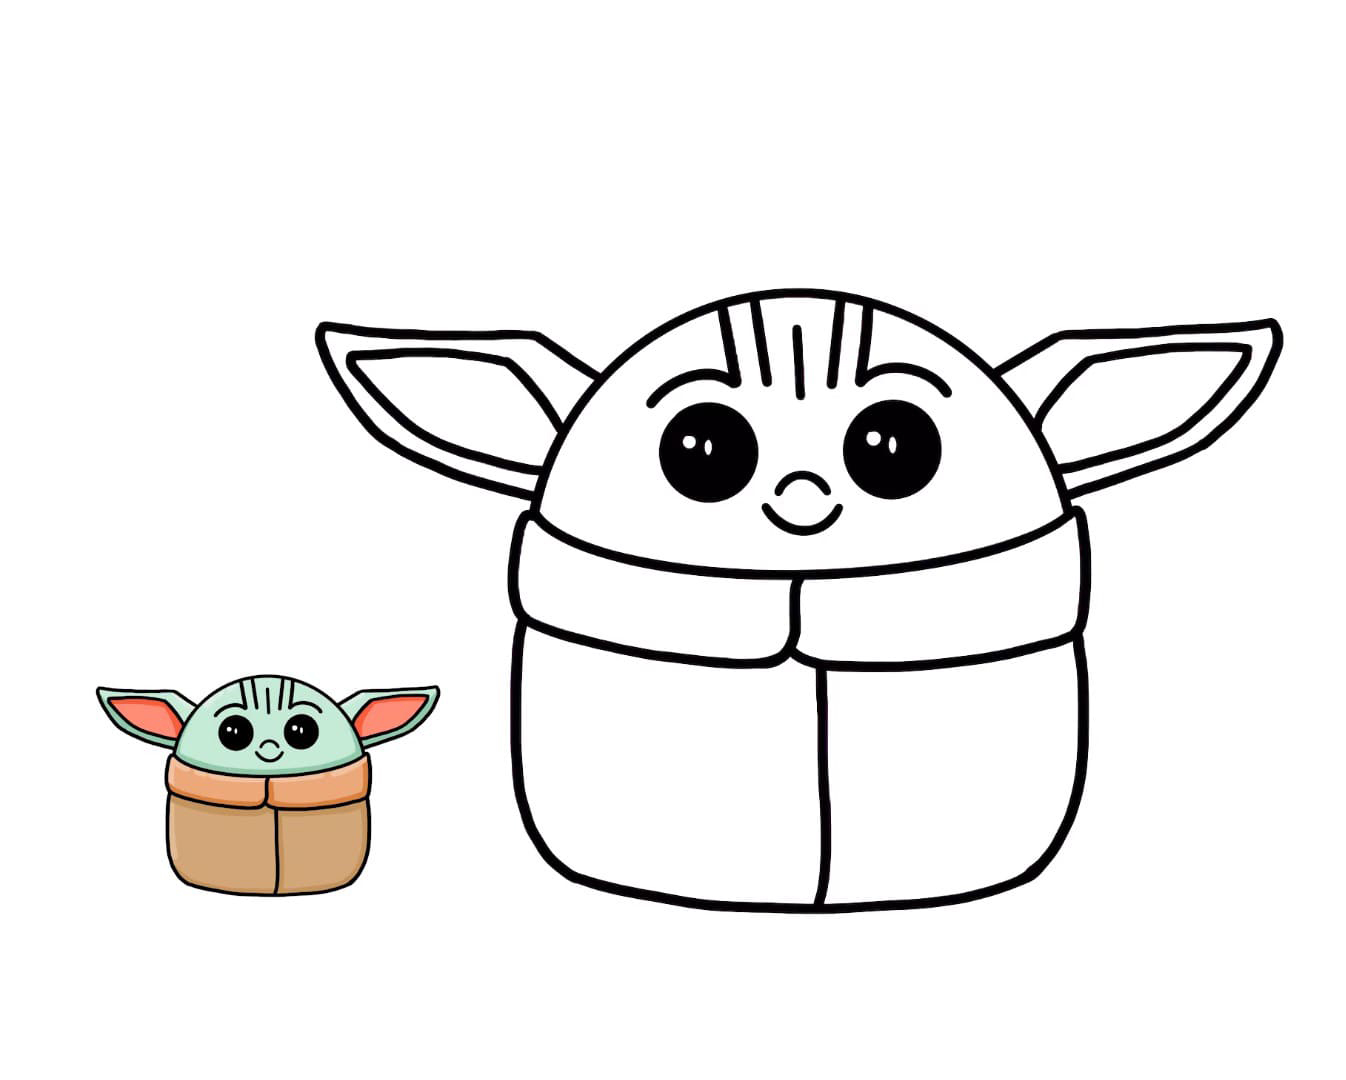 Coloring Pages Baby Yoda With a color coloring pattern For kids Print